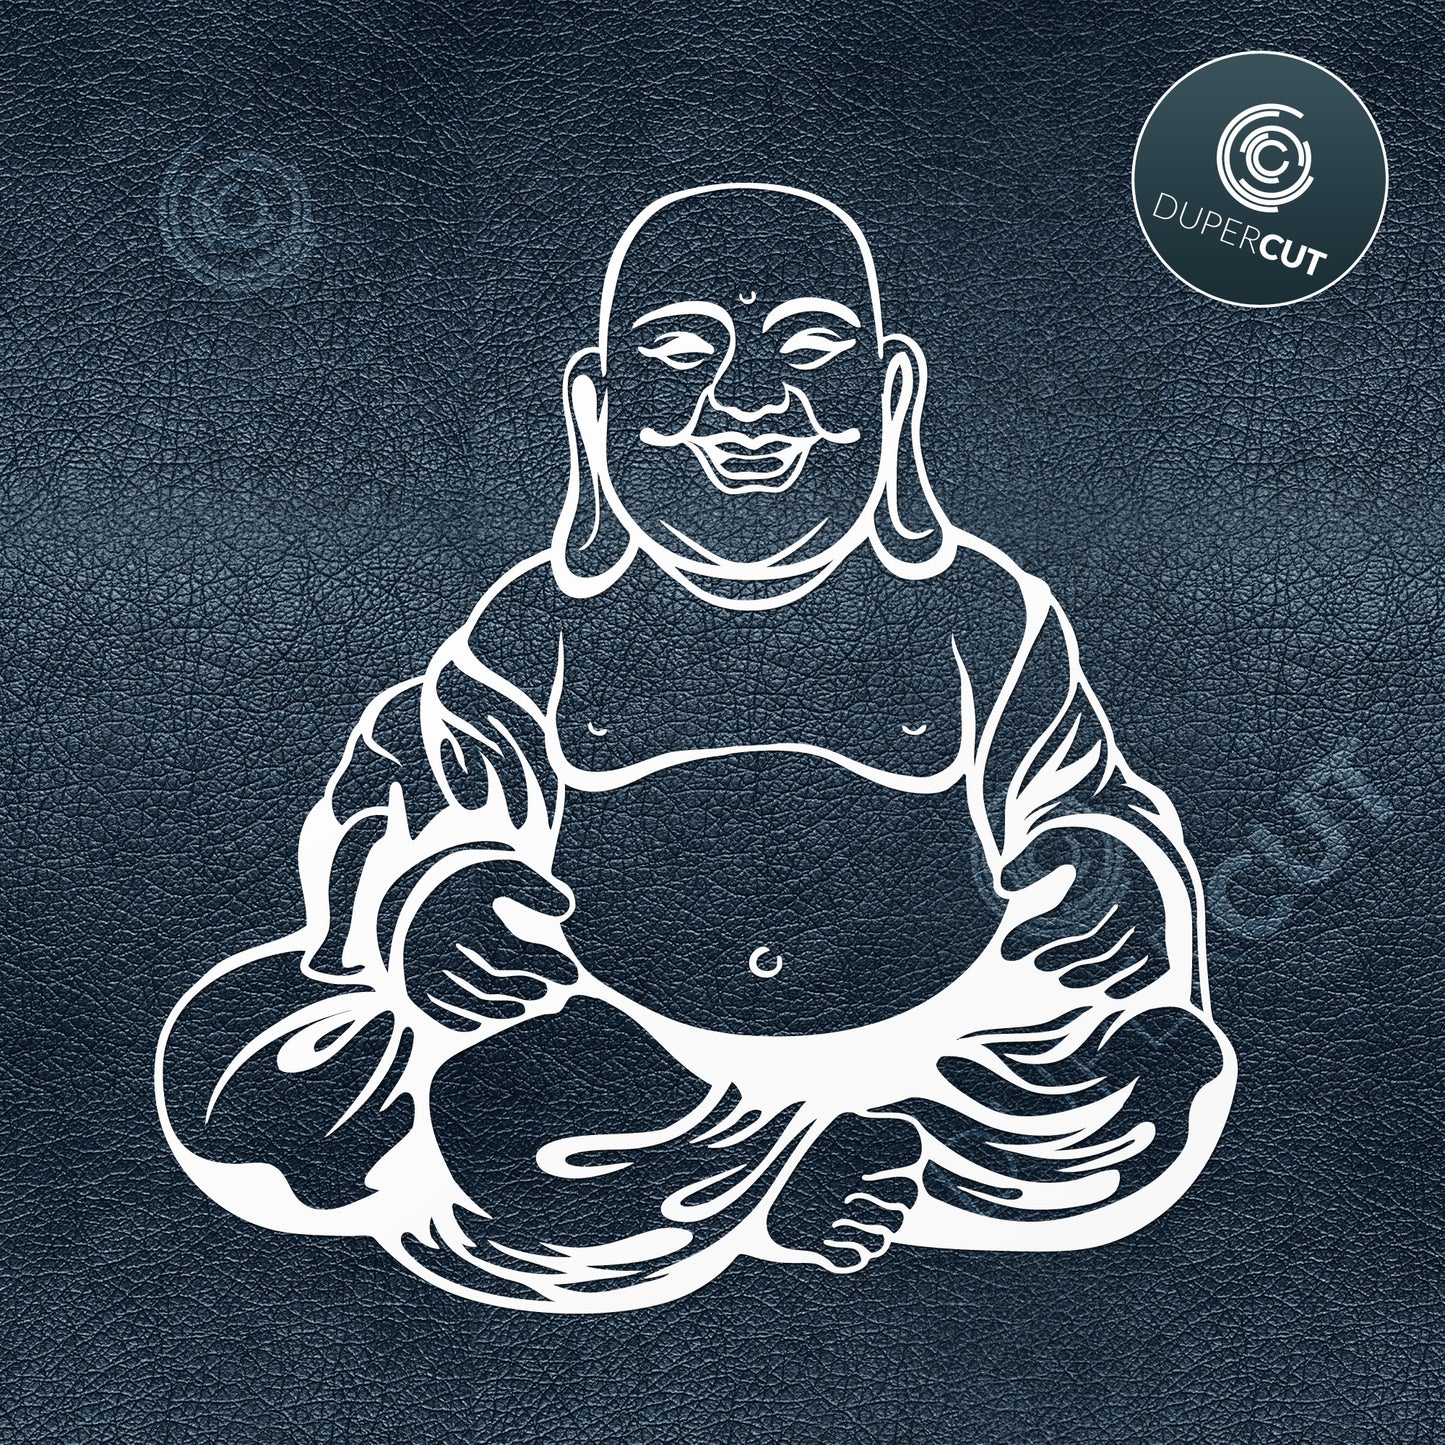 Fat lauging buddha. SVG PNG DXF files Paper cutting template for personal or commercial use. Vinyl template cutting files for Cricut, Glowforge, Silhouette, CNC